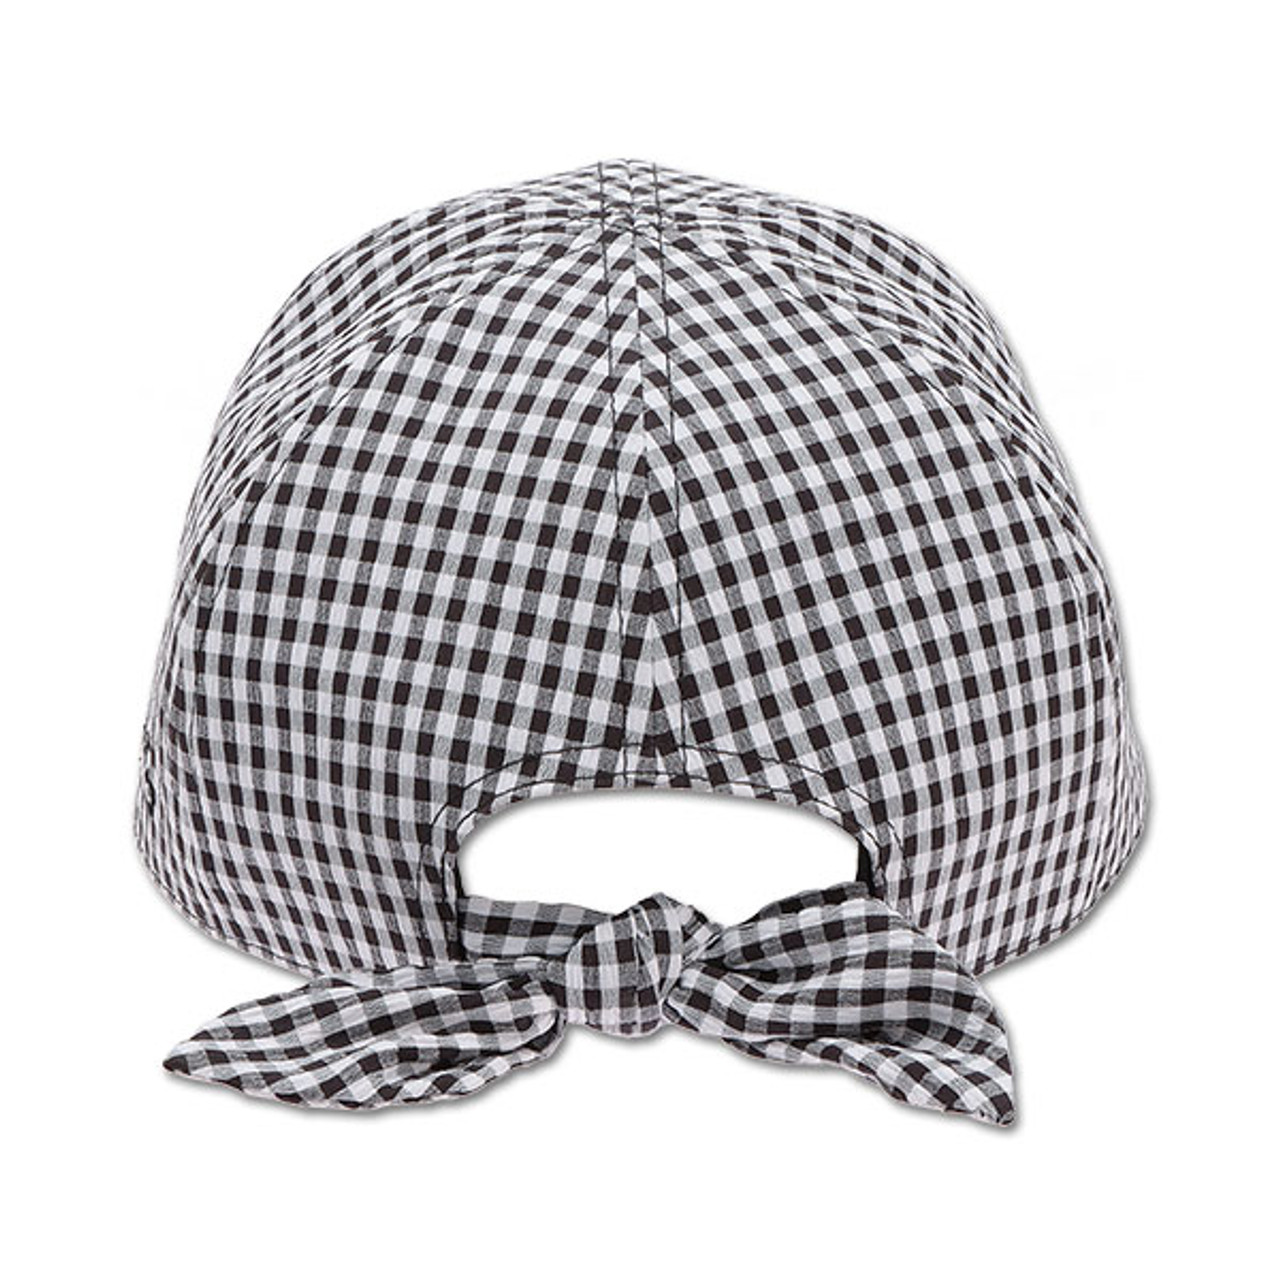 A black and white gingham cap. This photo shows the cap from the back and the cute ribbon tie detail.